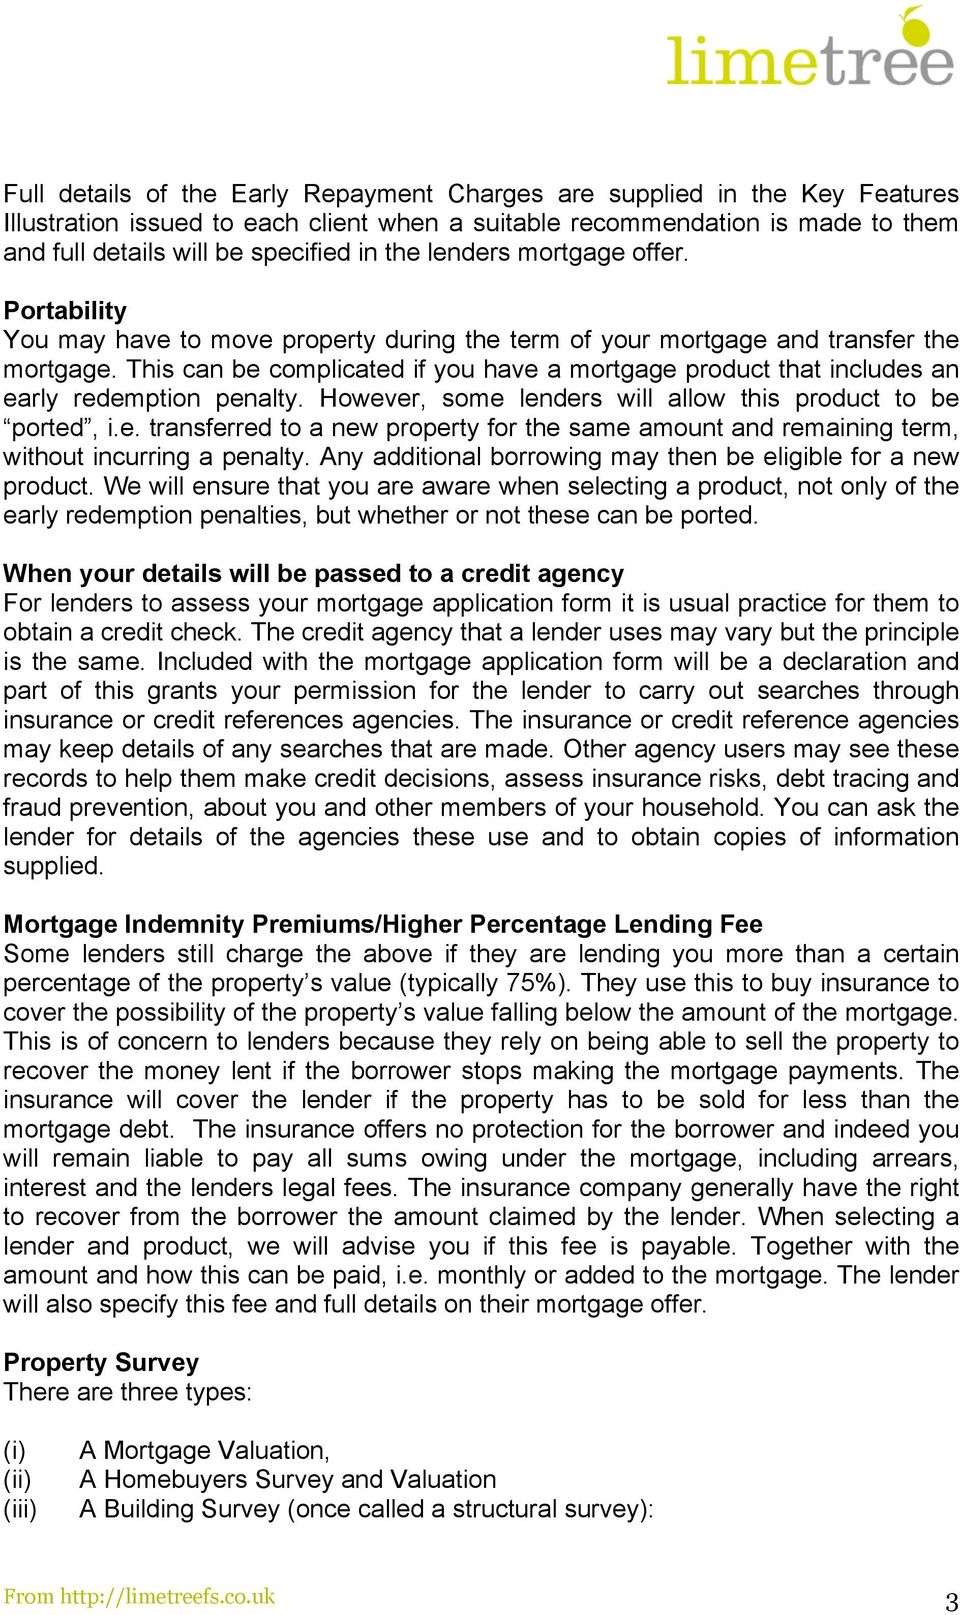 This can be complicated if you have a mortgage product that includes an early redemption penalty. However, some lenders will allow this product to be ported, i.e. transferred to a new property for the same amount and remaining term, without incurring a penalty.